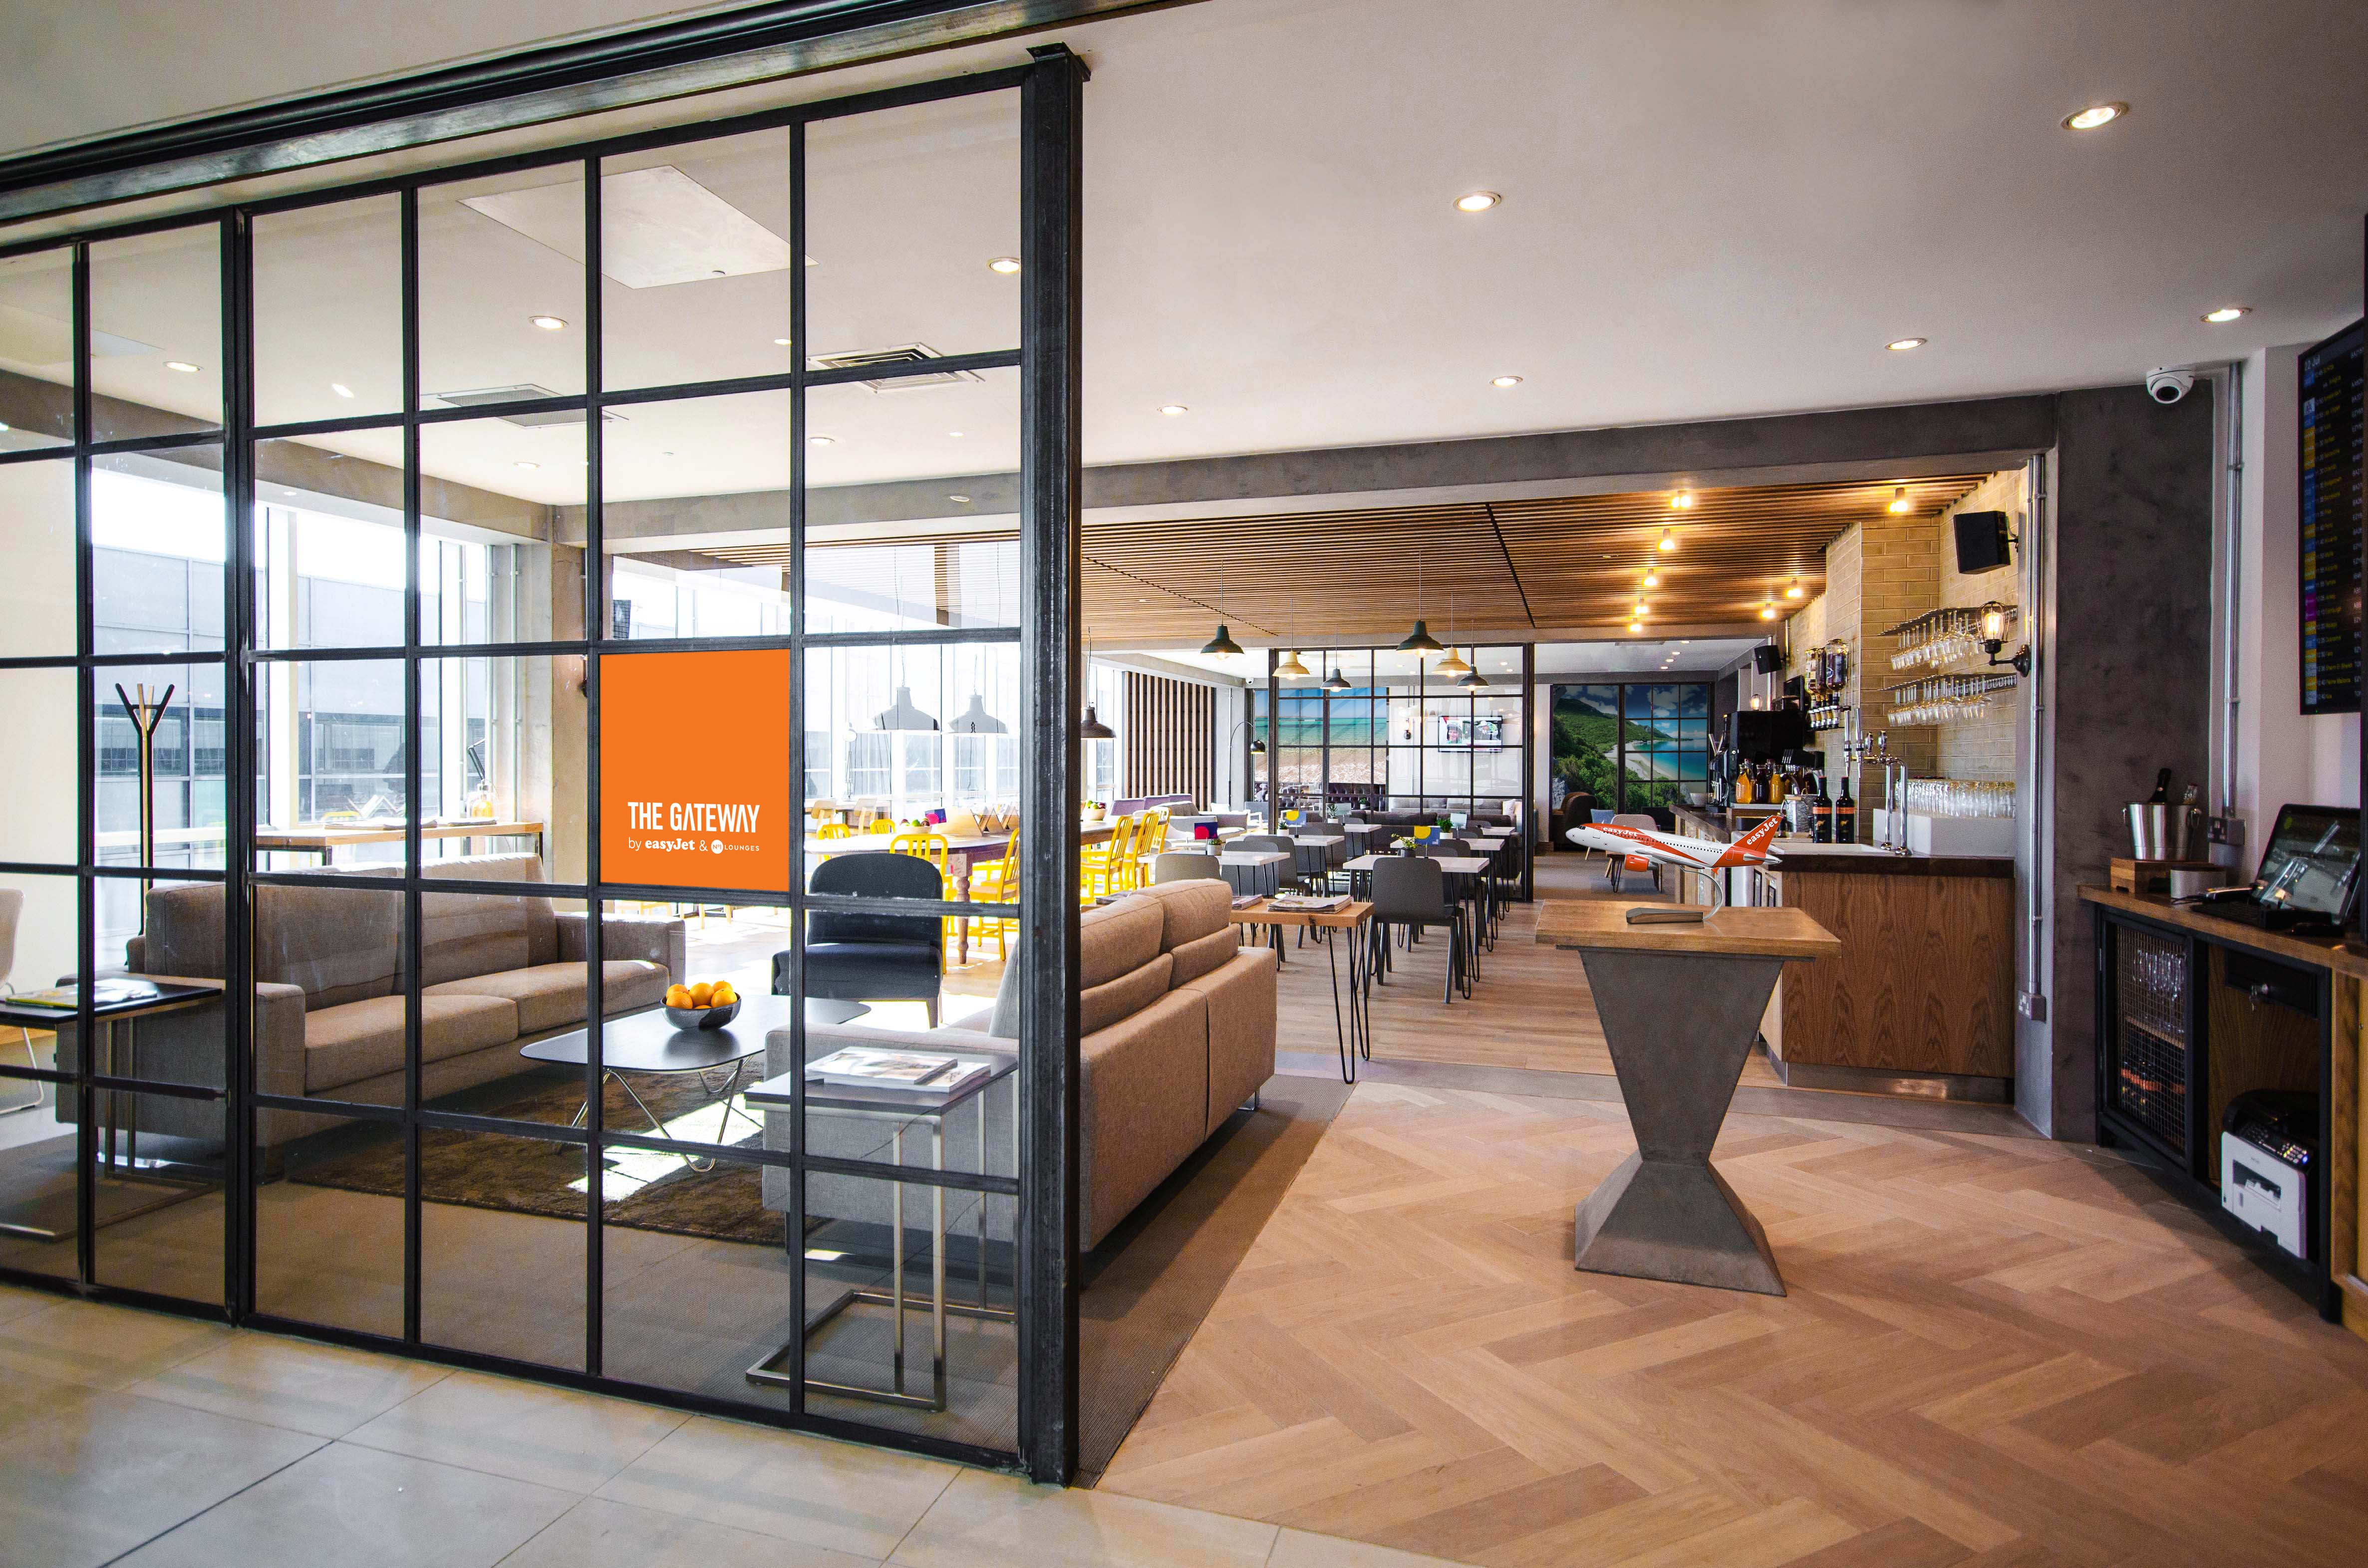 EasyJet’s first airport lounge at Gatwick